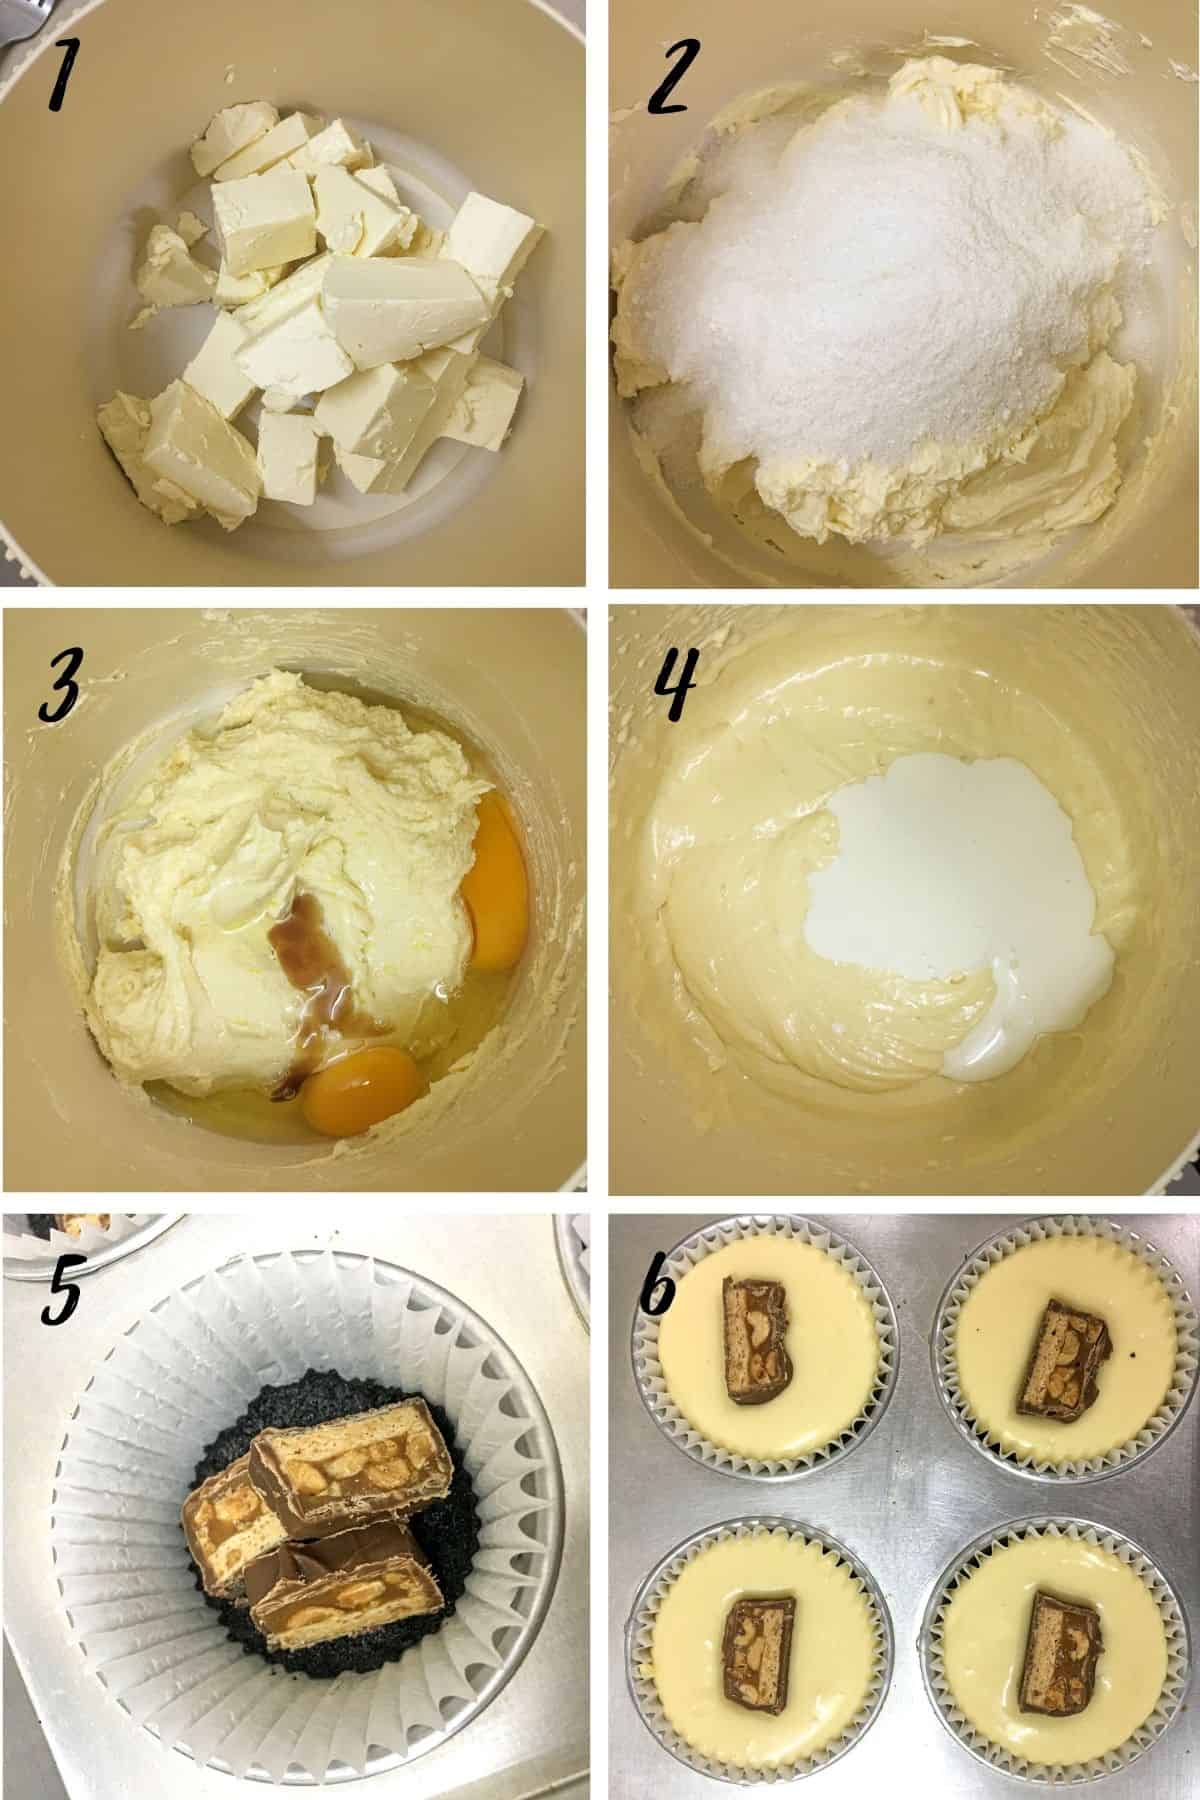 A poster of 6 images showing how to make Snickers cheesecake batter.